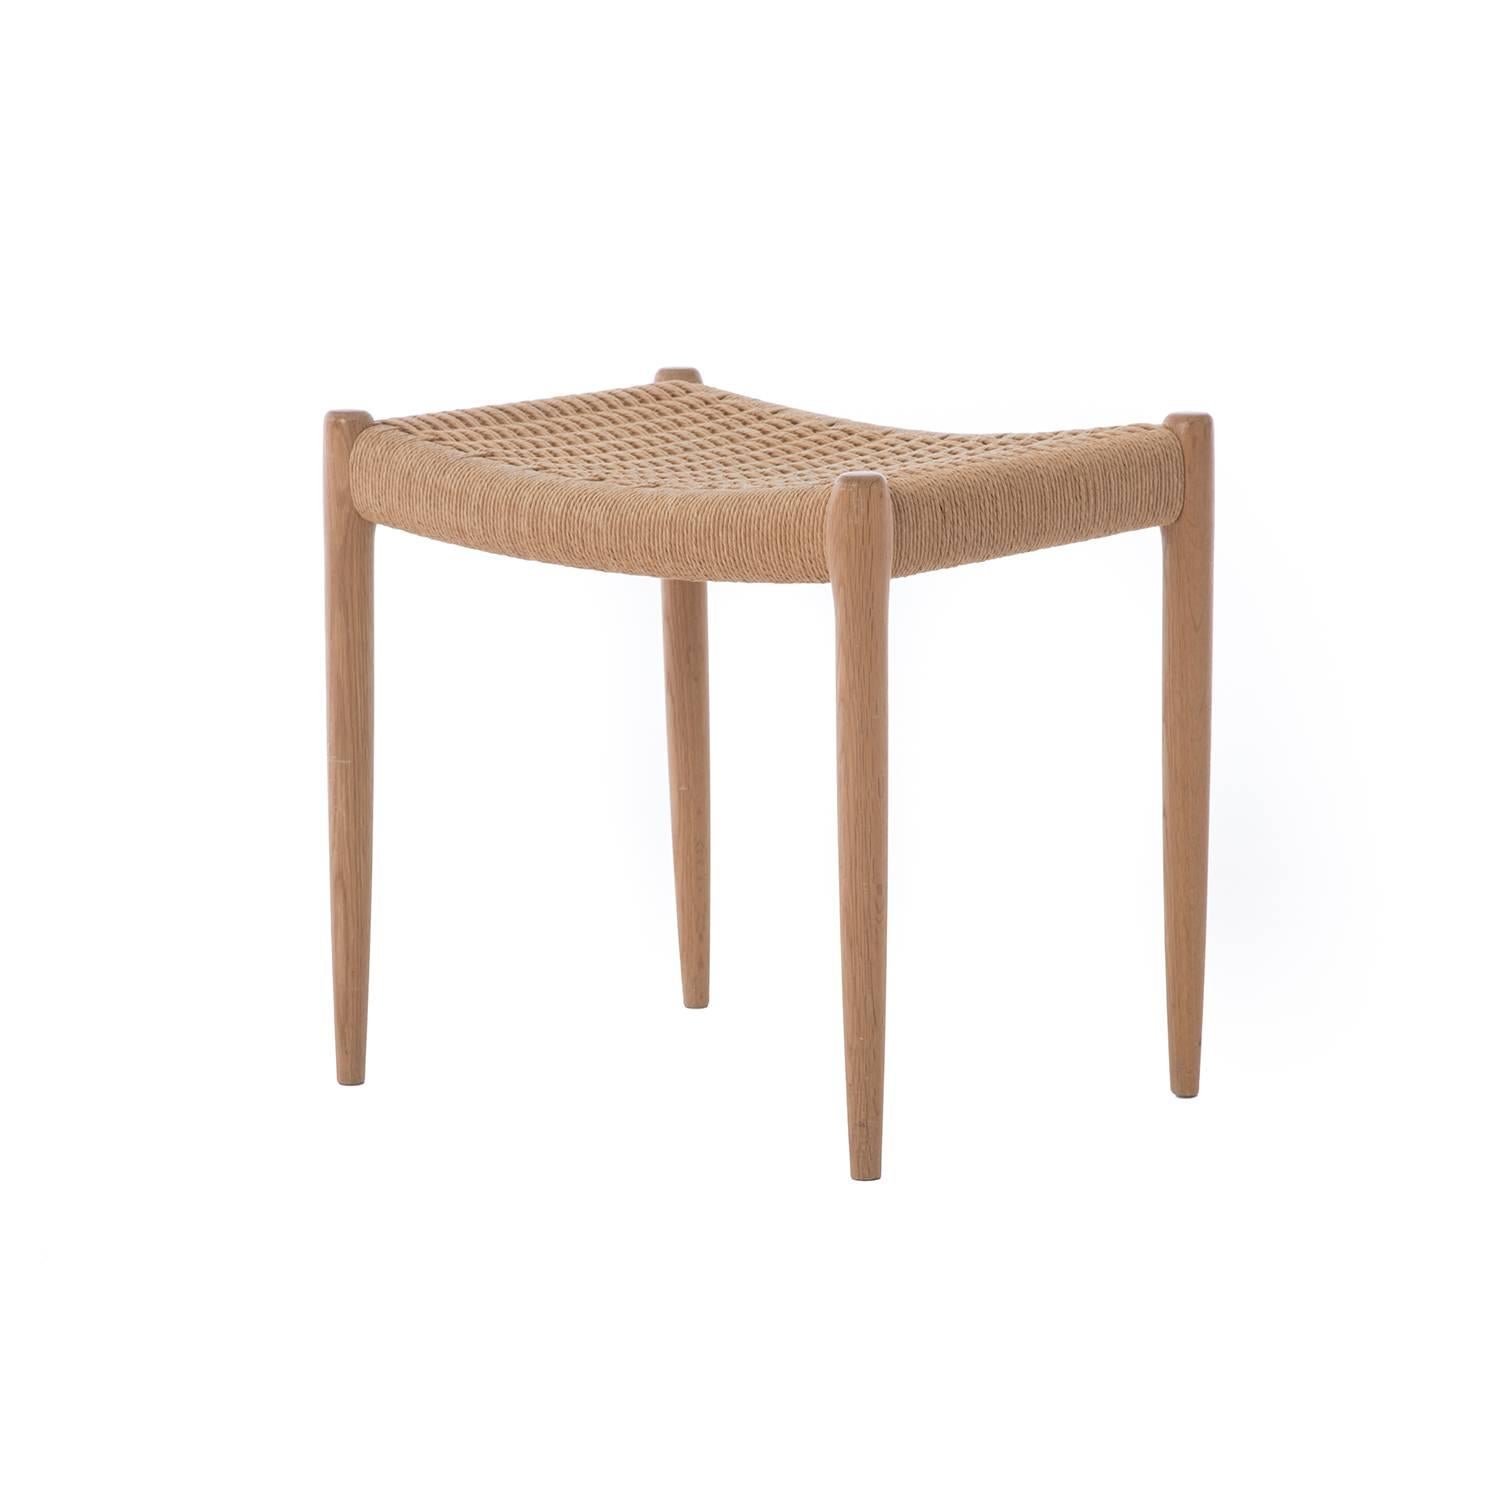 This Danish modern stool is crafted of white oak and retains its original Danish Cord seat. A vintage original.

 